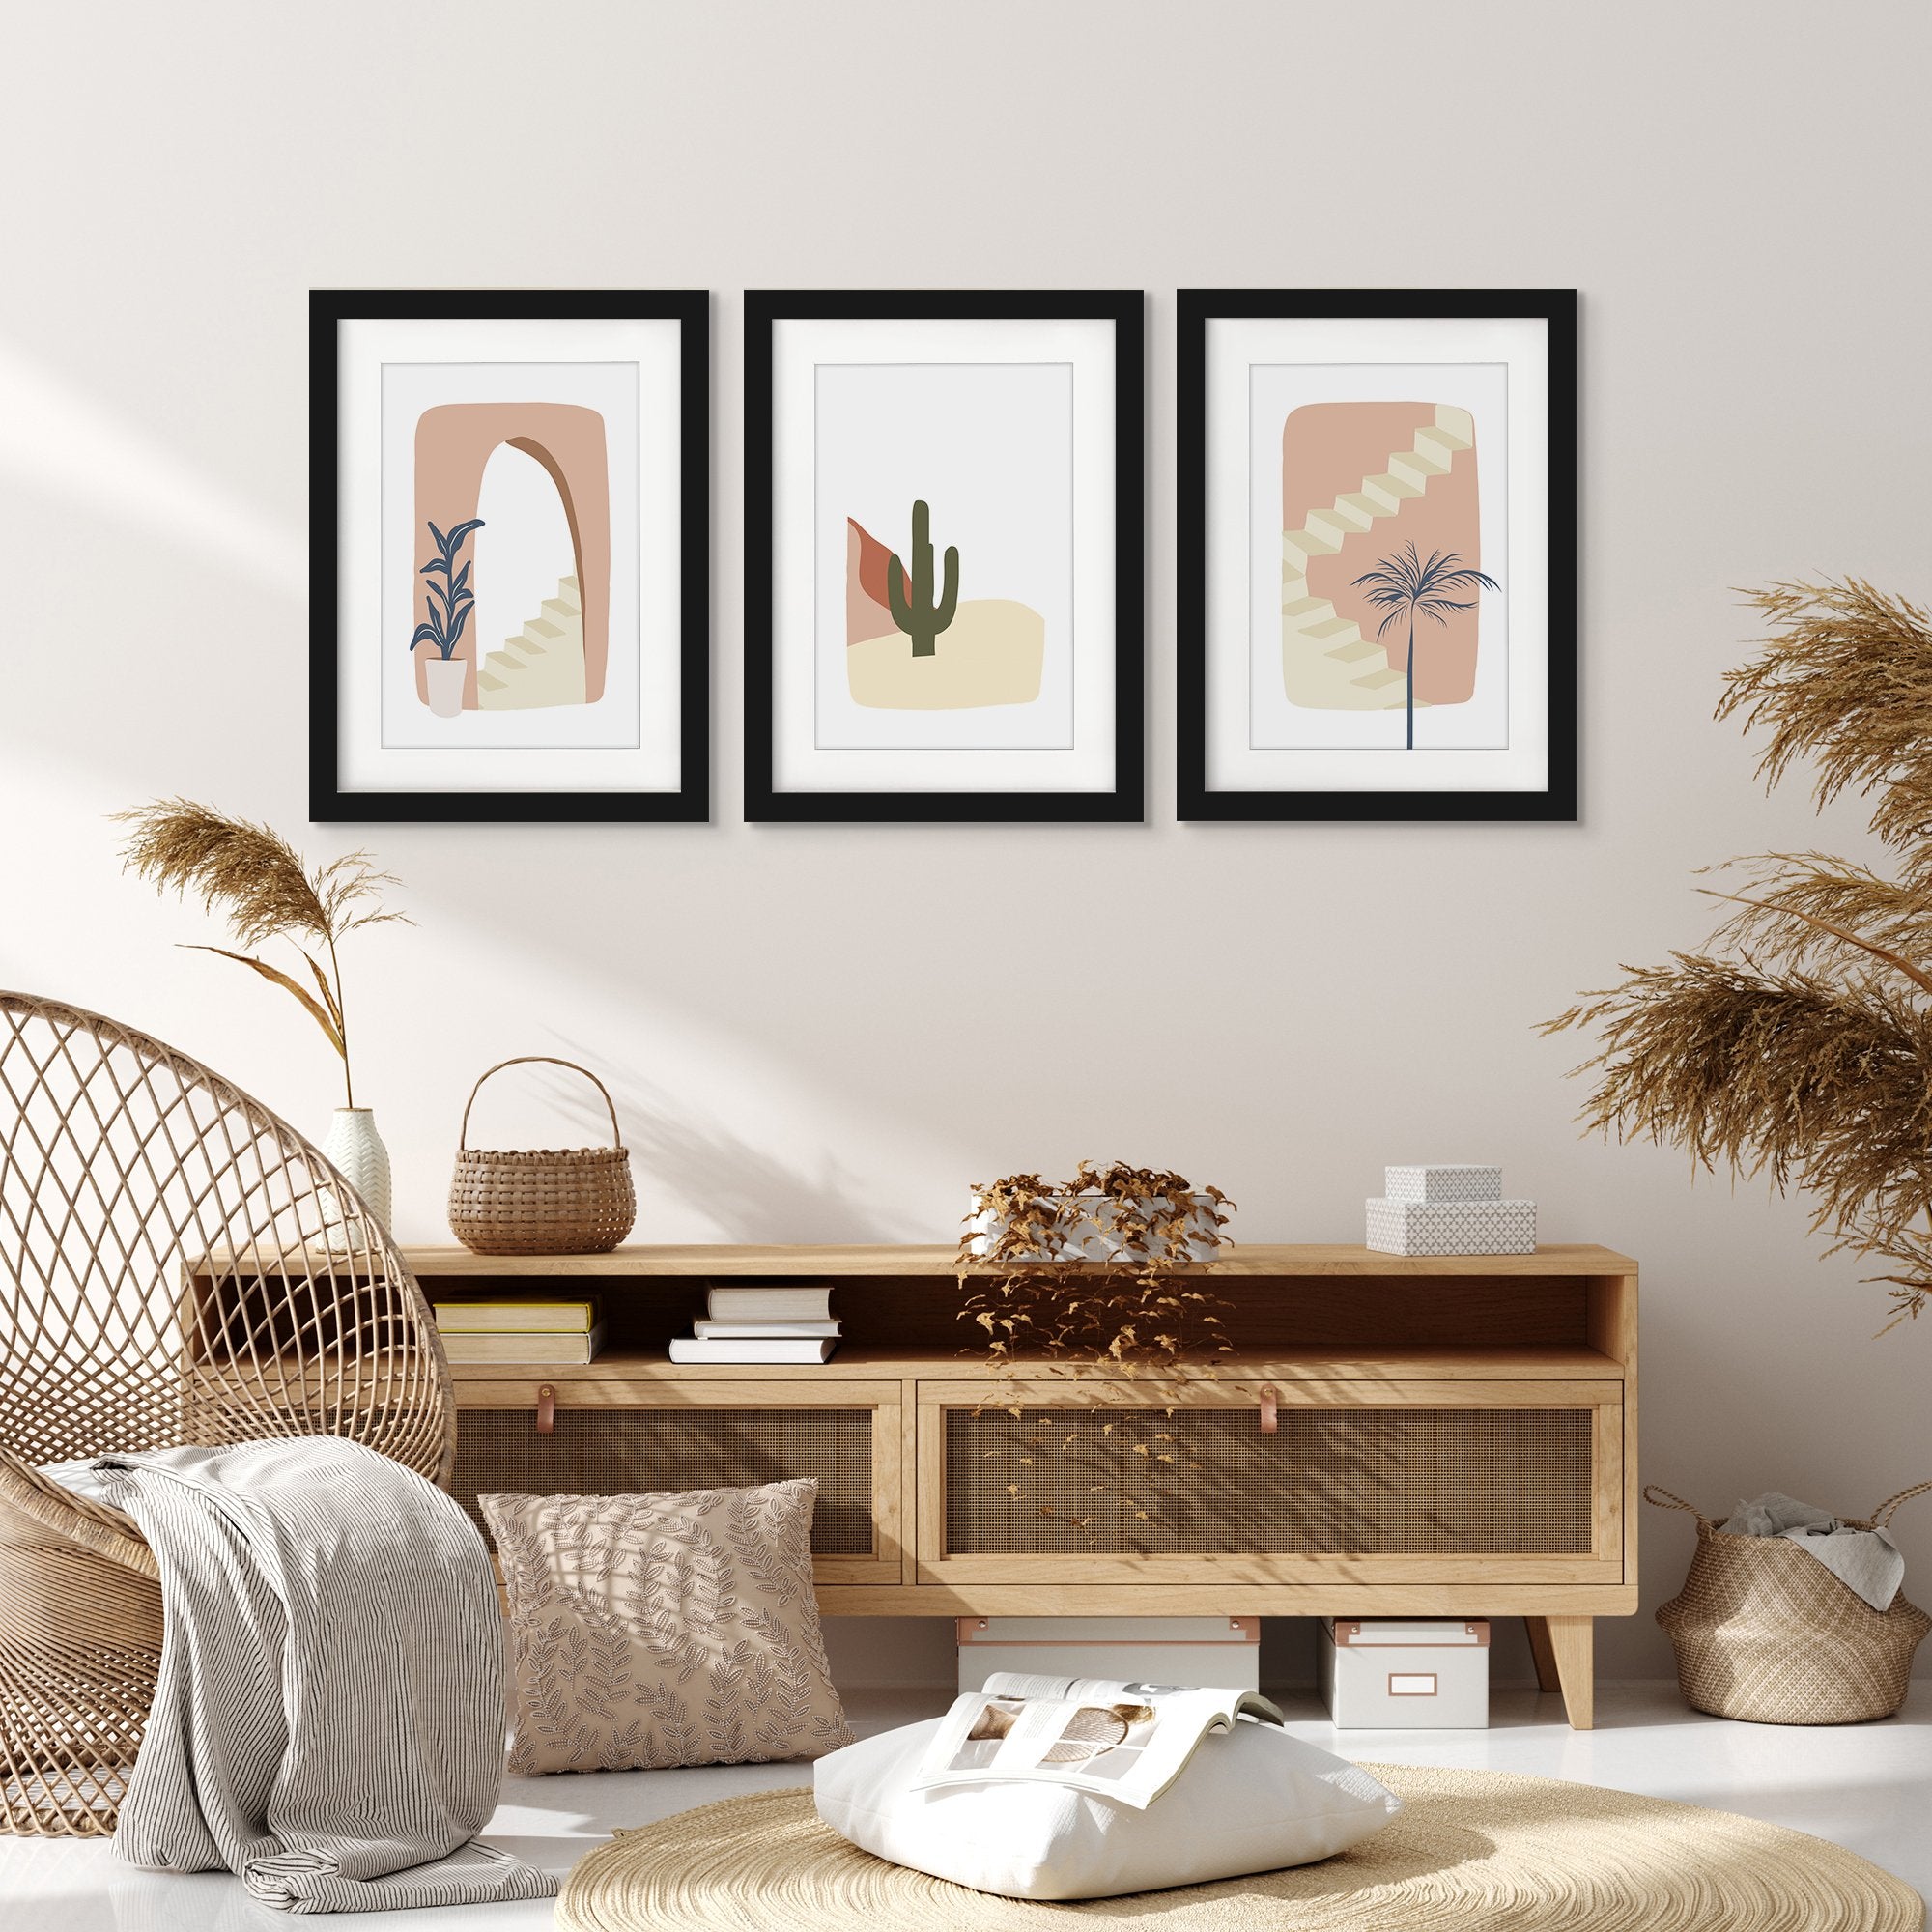 Pink Staircase by Wall + Wonder - 3 Piece Gallery Framed Print Art Set